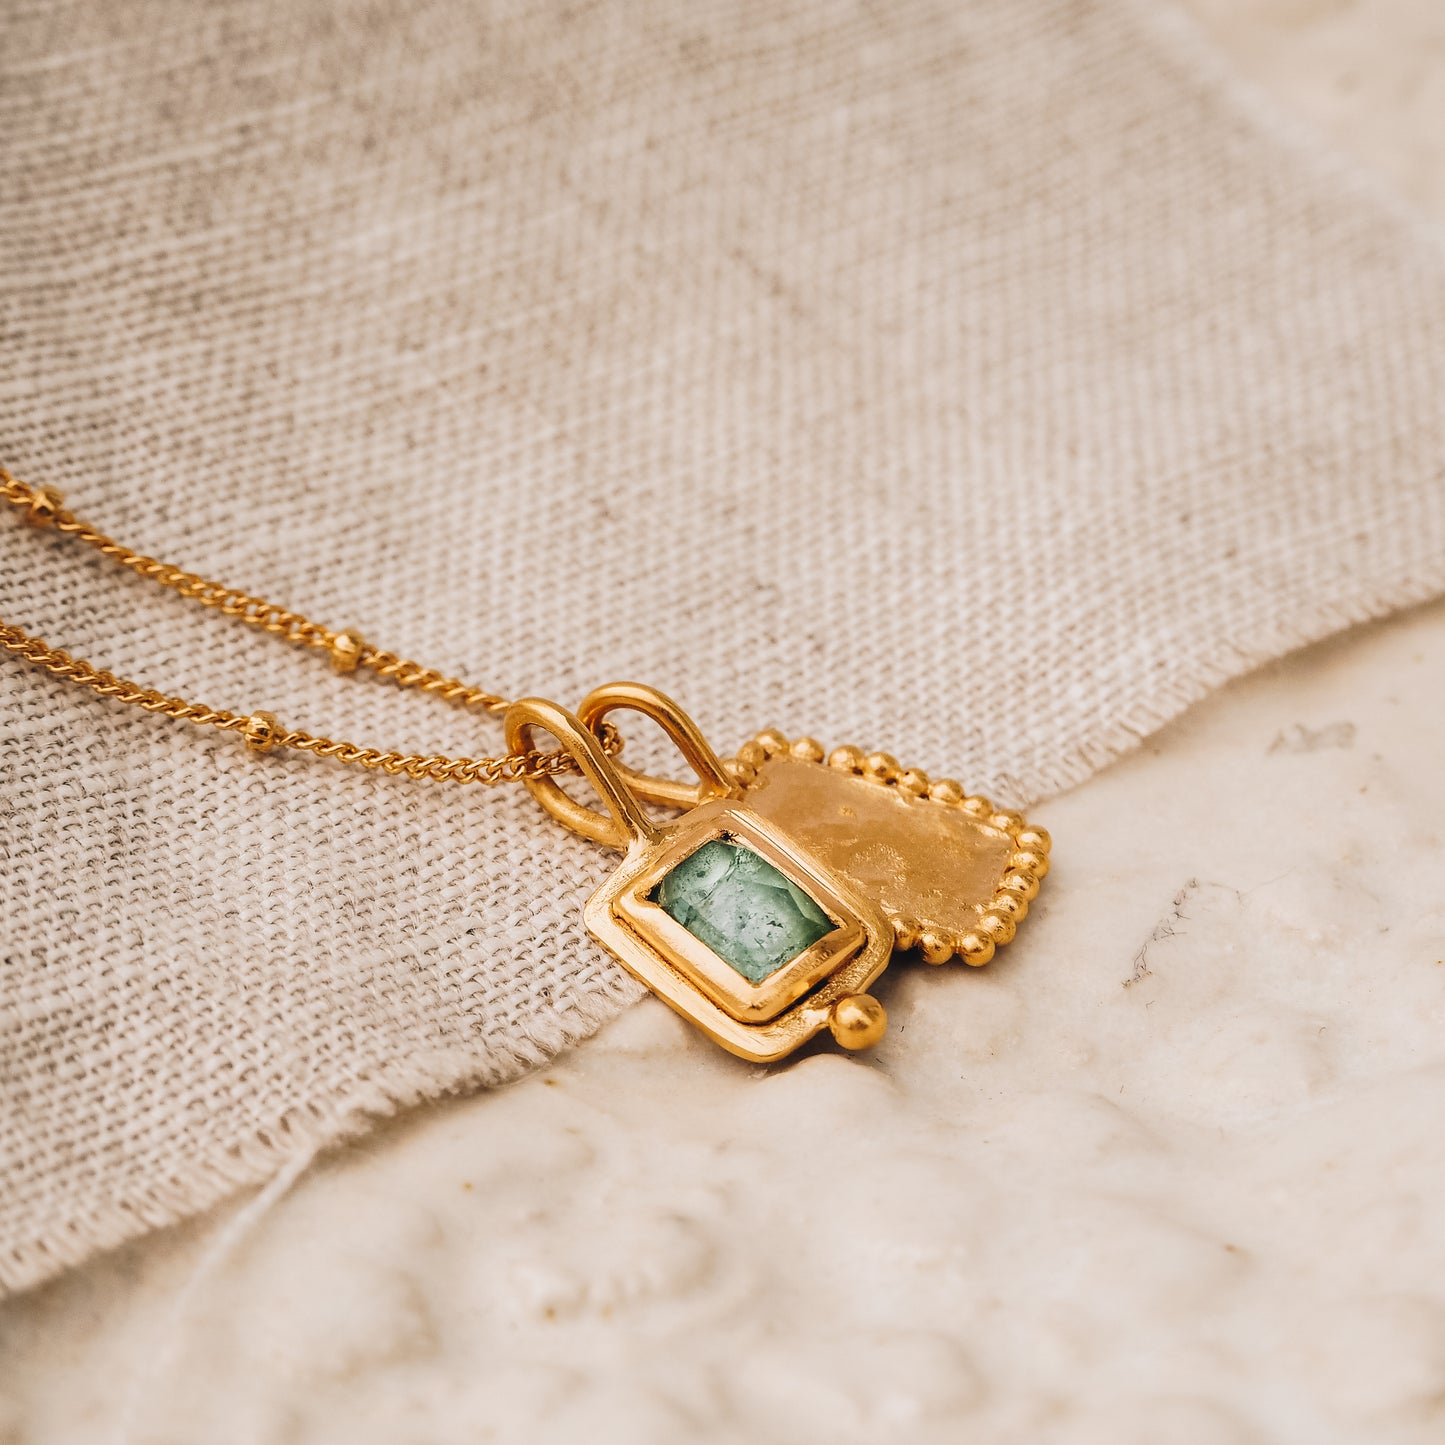 Handcrafted square gold pendant featuring a vibrant blue rose cut tourmaline gemstone and meticulous granulation detail, suspended gracefully from a delicate satellite chain.